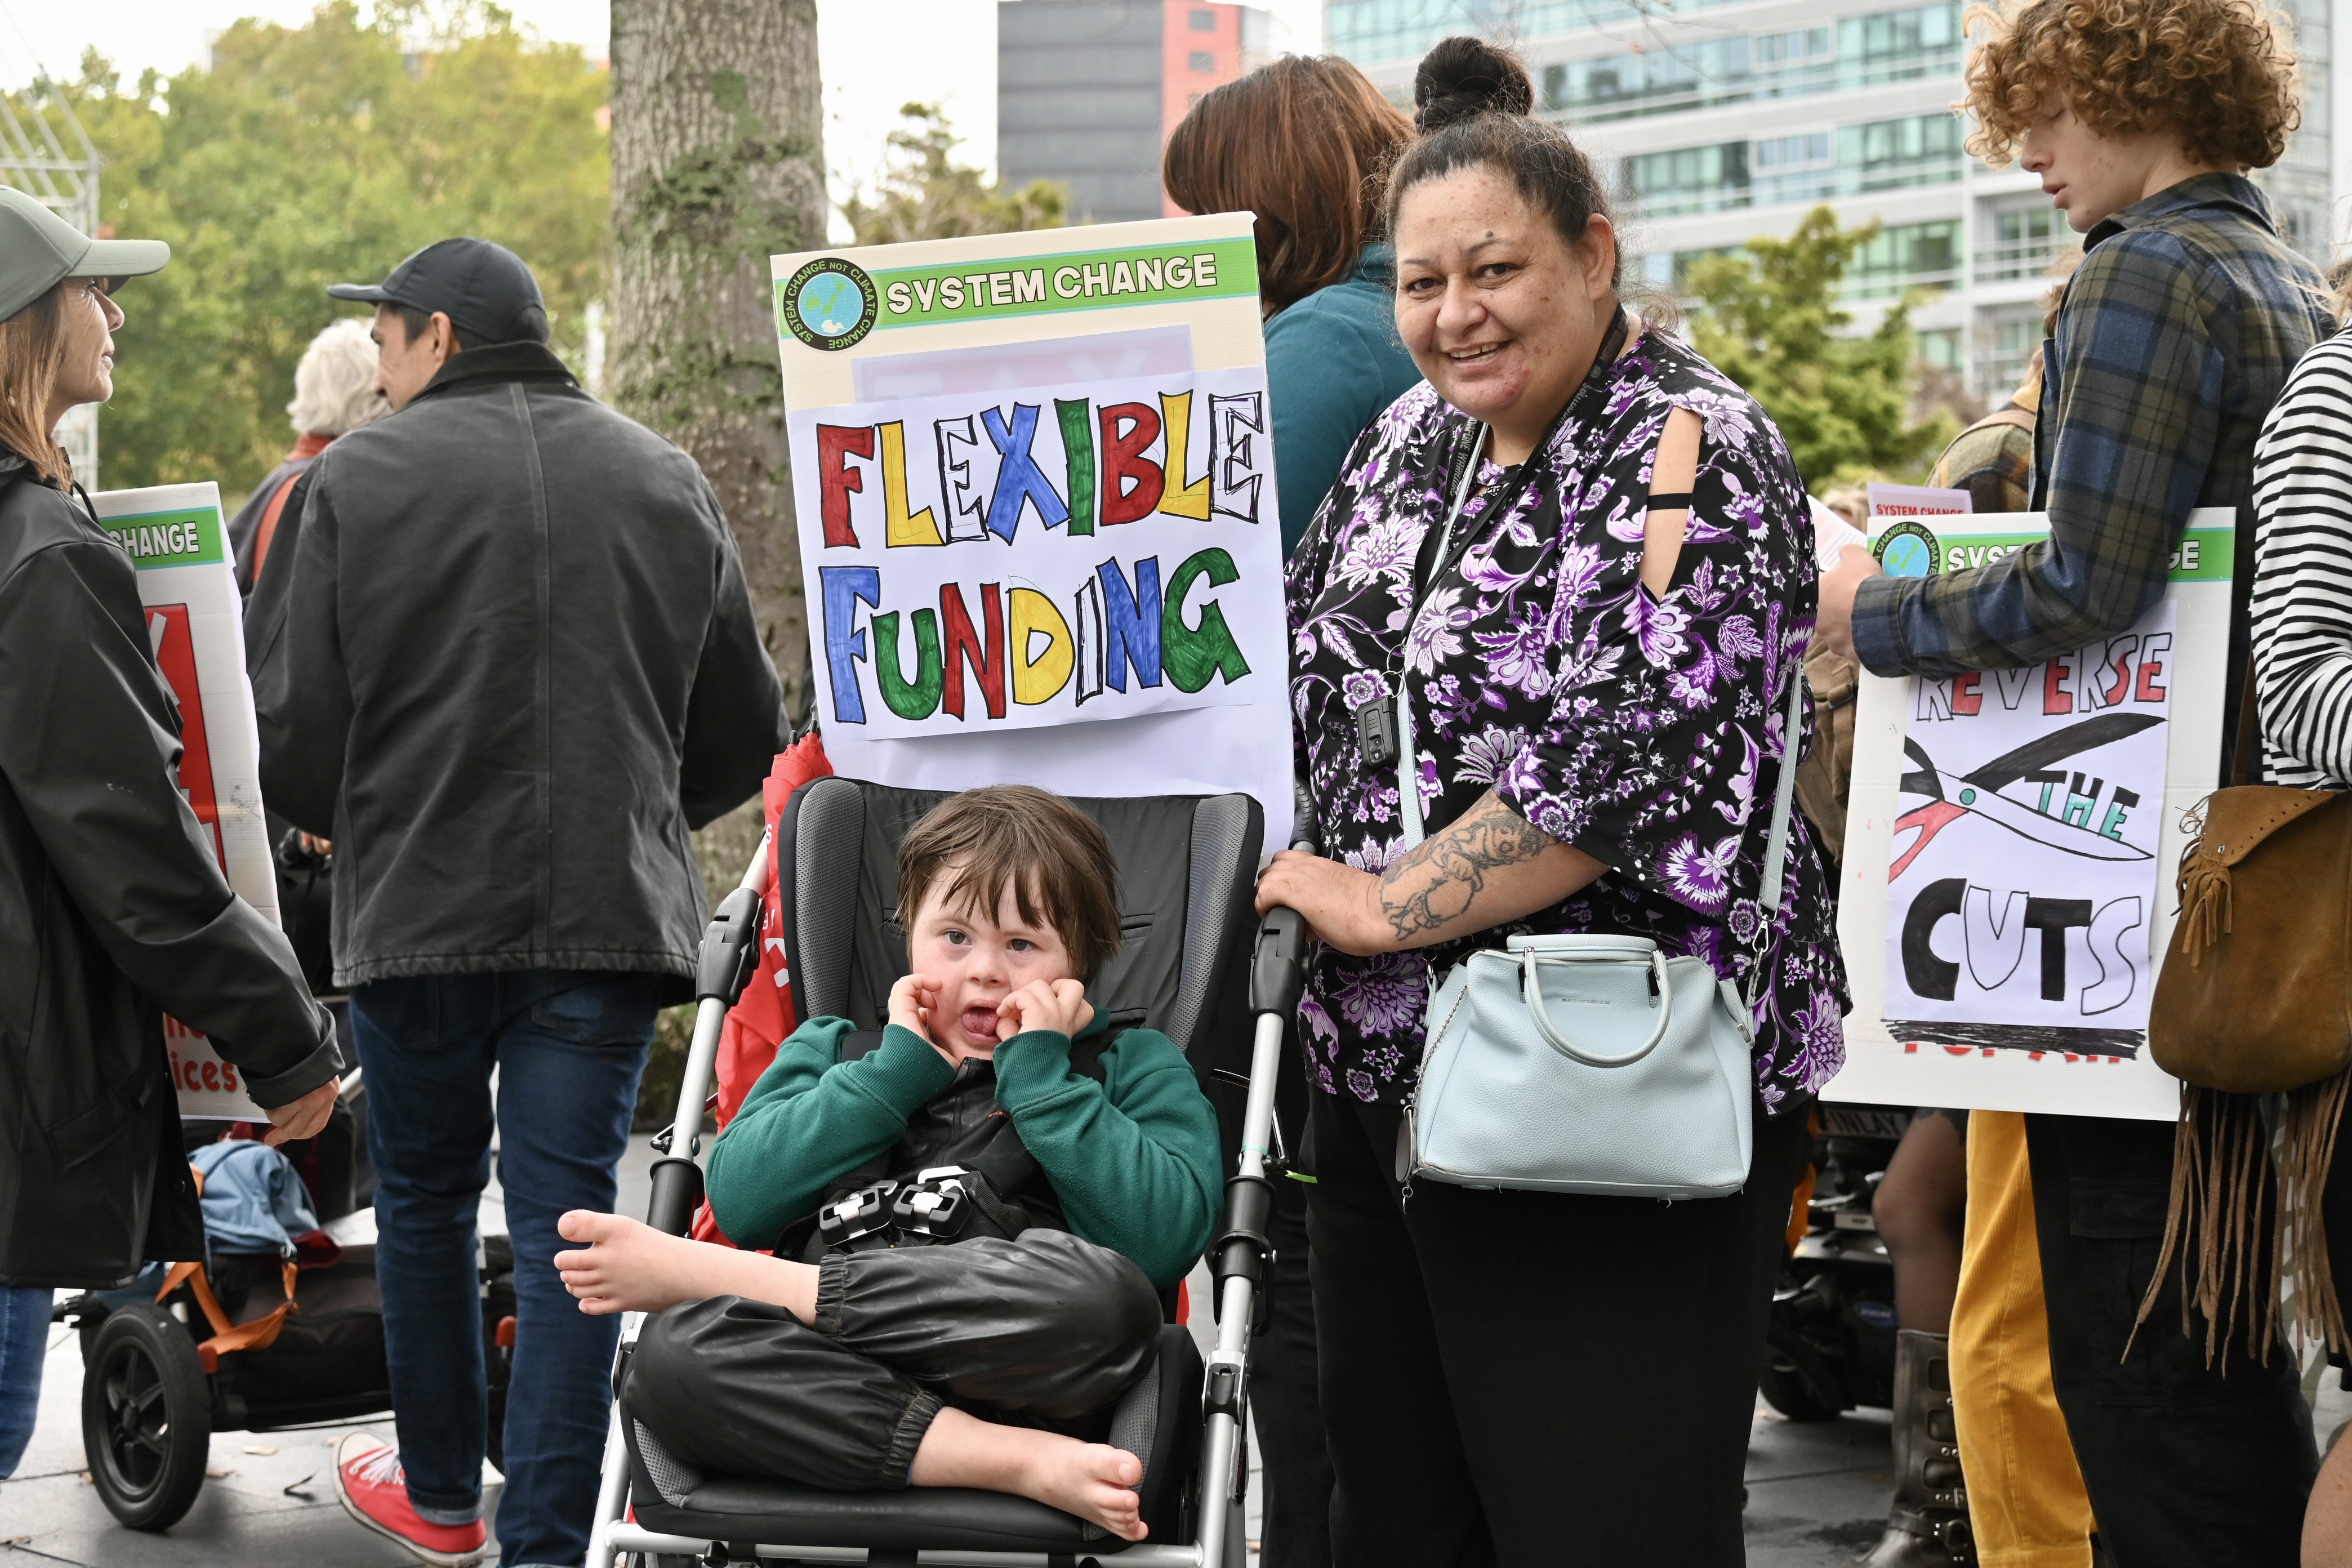 A child with Down syndrome sits in a pushchair and a woman stands beside him with a placard reading: System change. Flexible funding. 